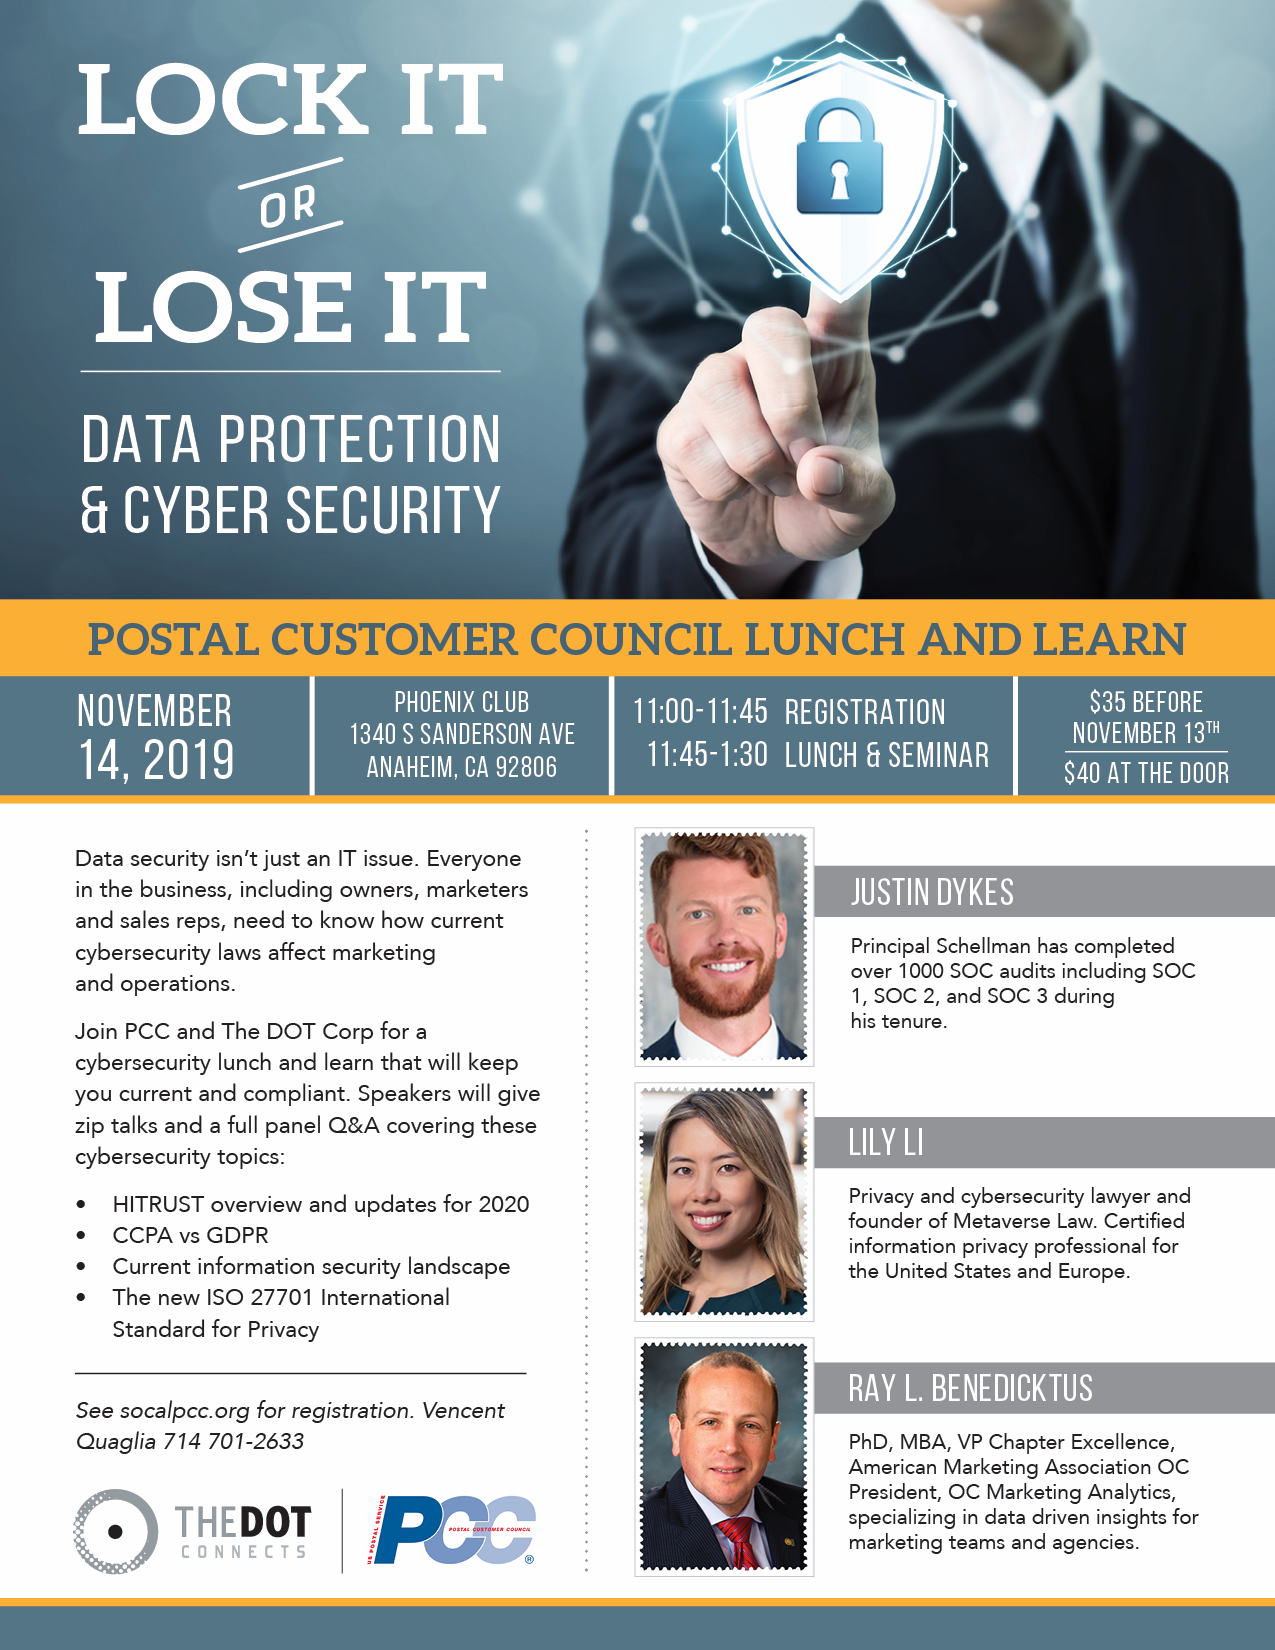 Postal Customer Council Flyer - Data Protection Lunch and Learn on November 14